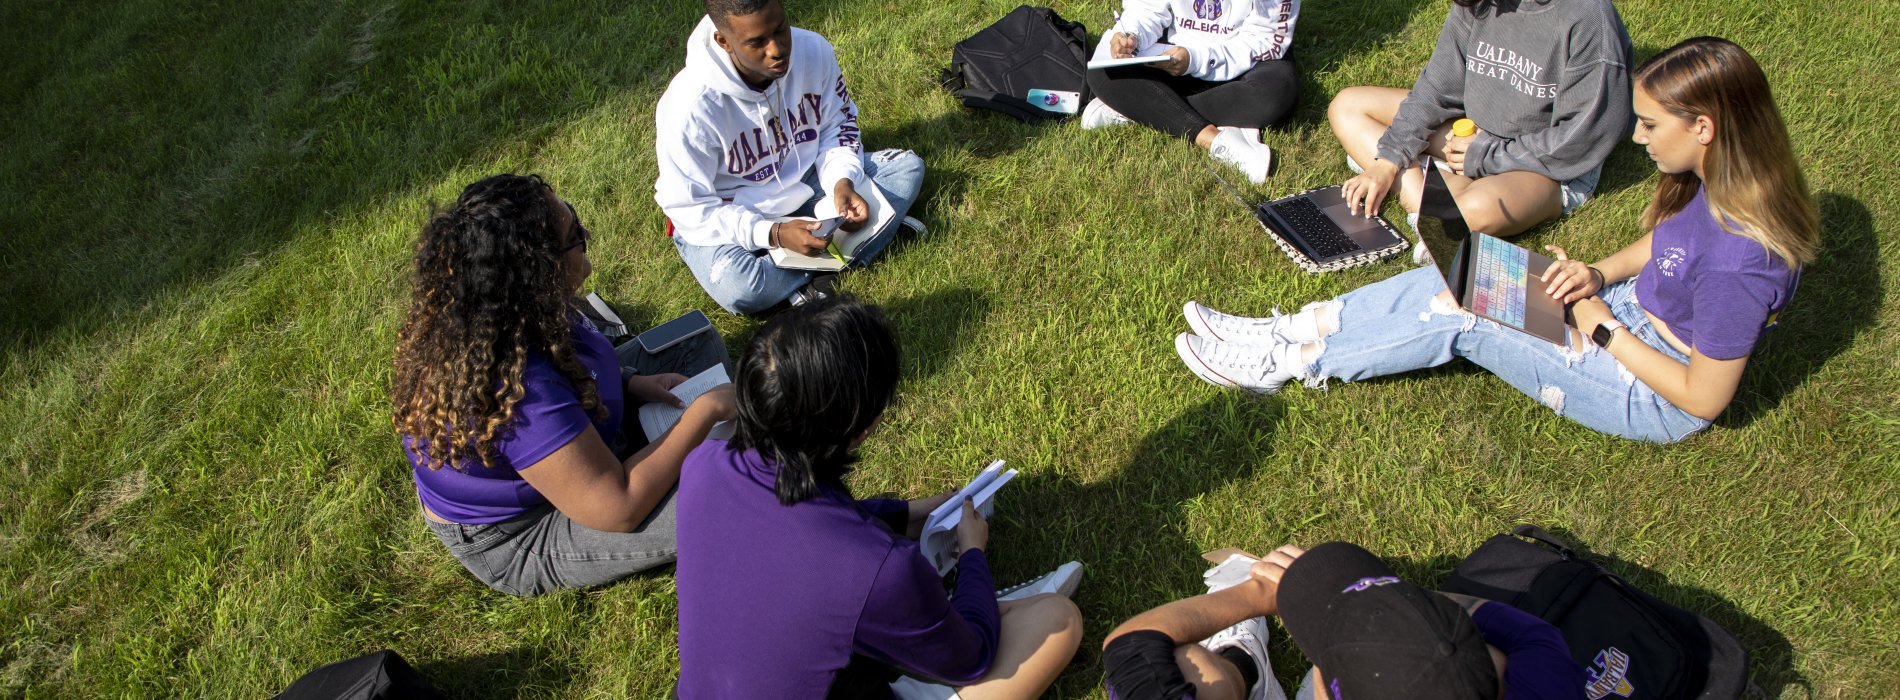 Students gathered in a circle outside to study